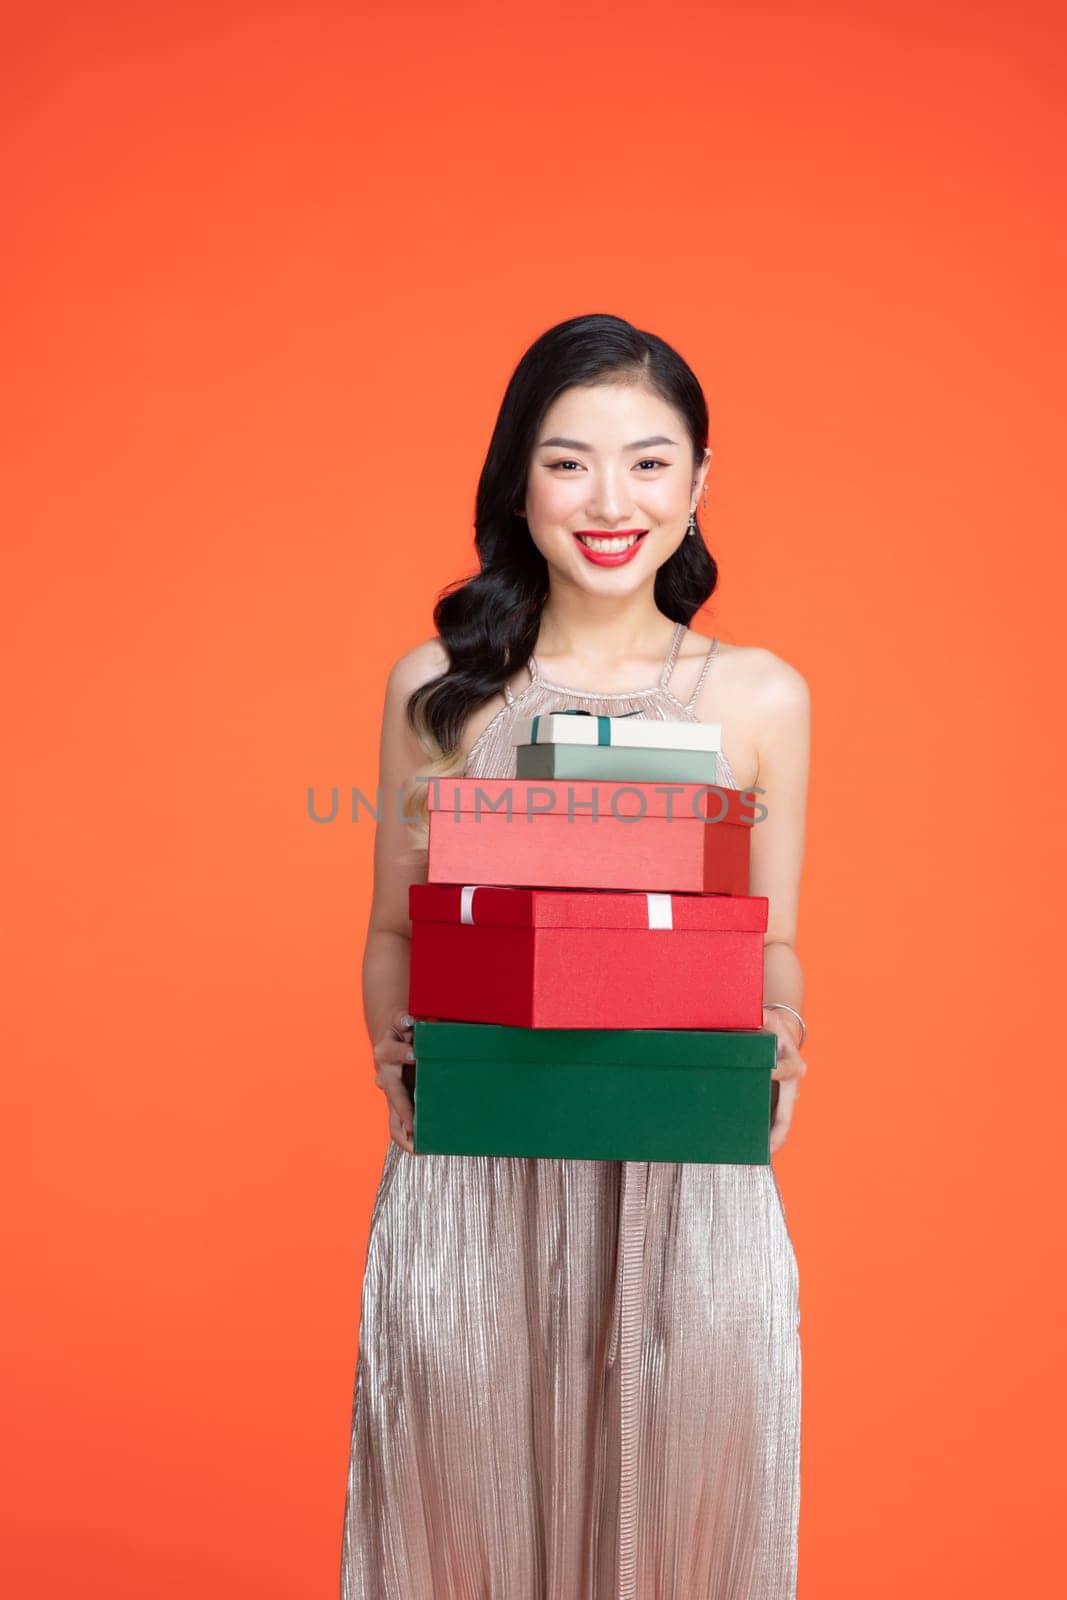 Charming female wearing shiny dress standing with pile of celebrating presents on red background